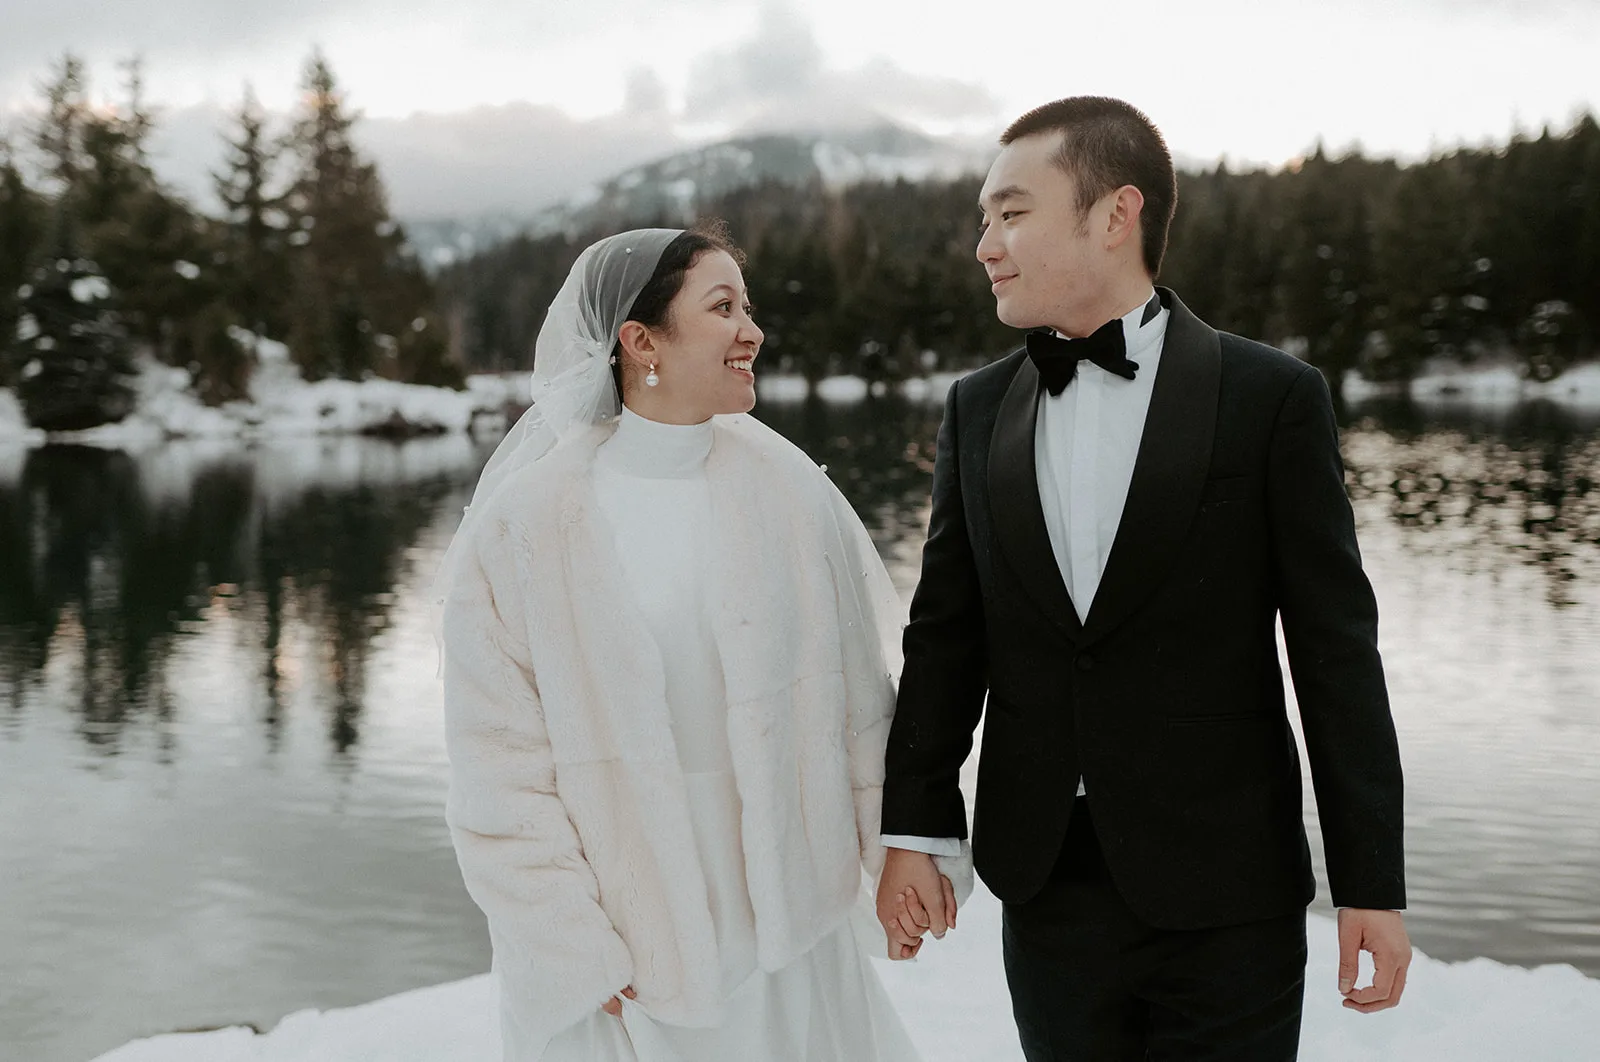 A beaming bride and groom walk hand in hand among a snowy lake landscape.